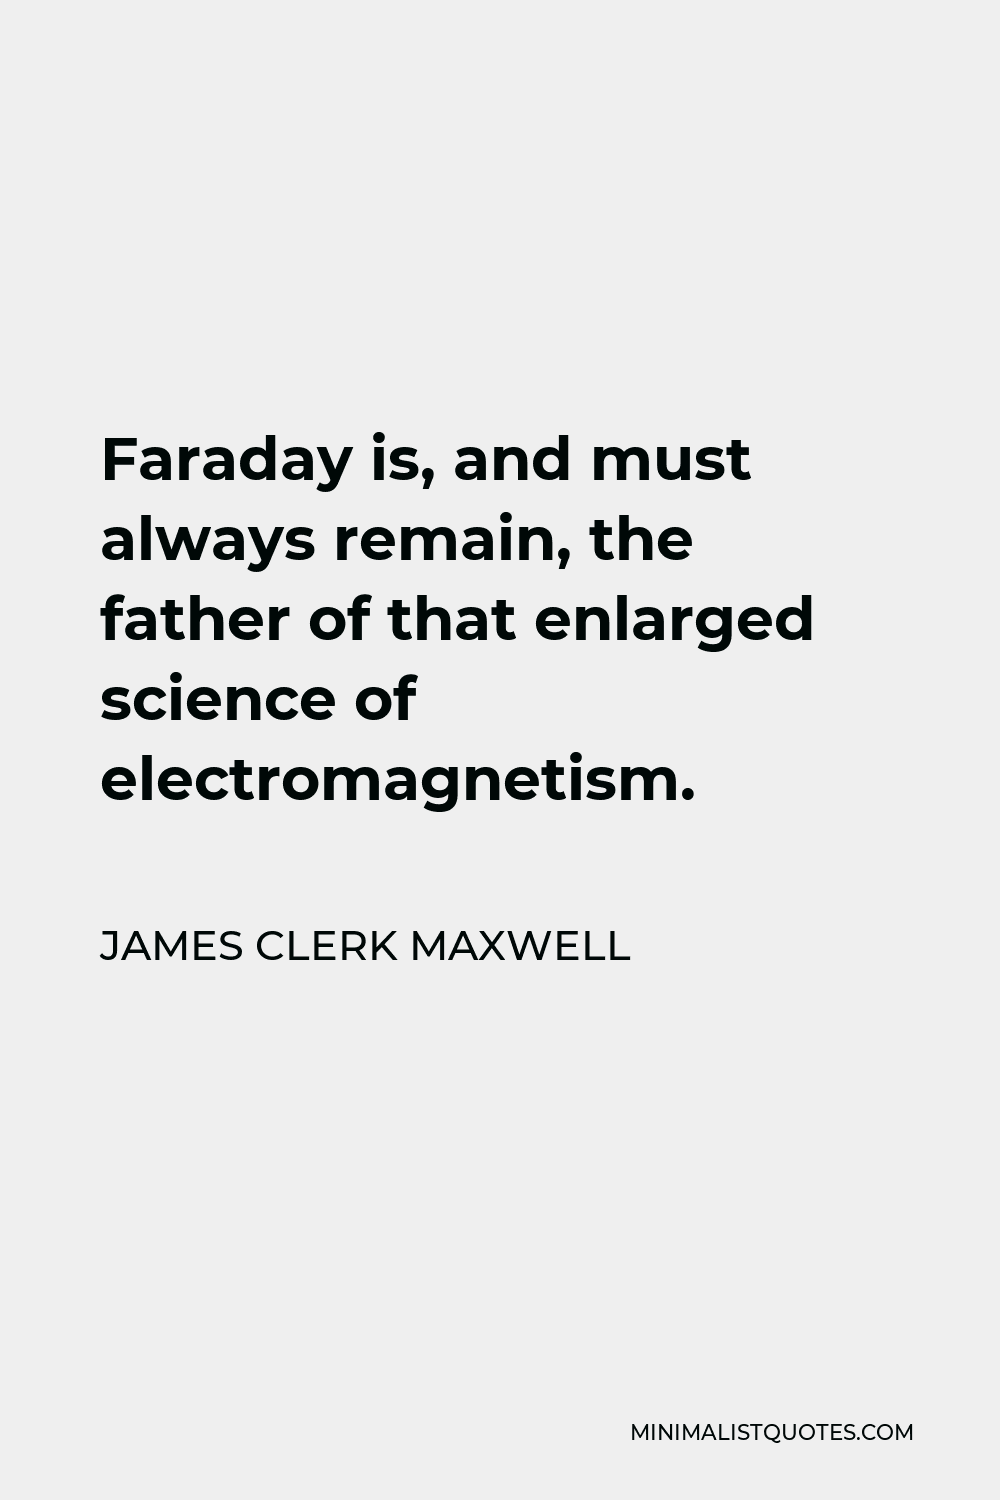 James Clerk Maxwell Quote - Faraday is, and must always remain, the father of that enlarged science of electromagnetism.